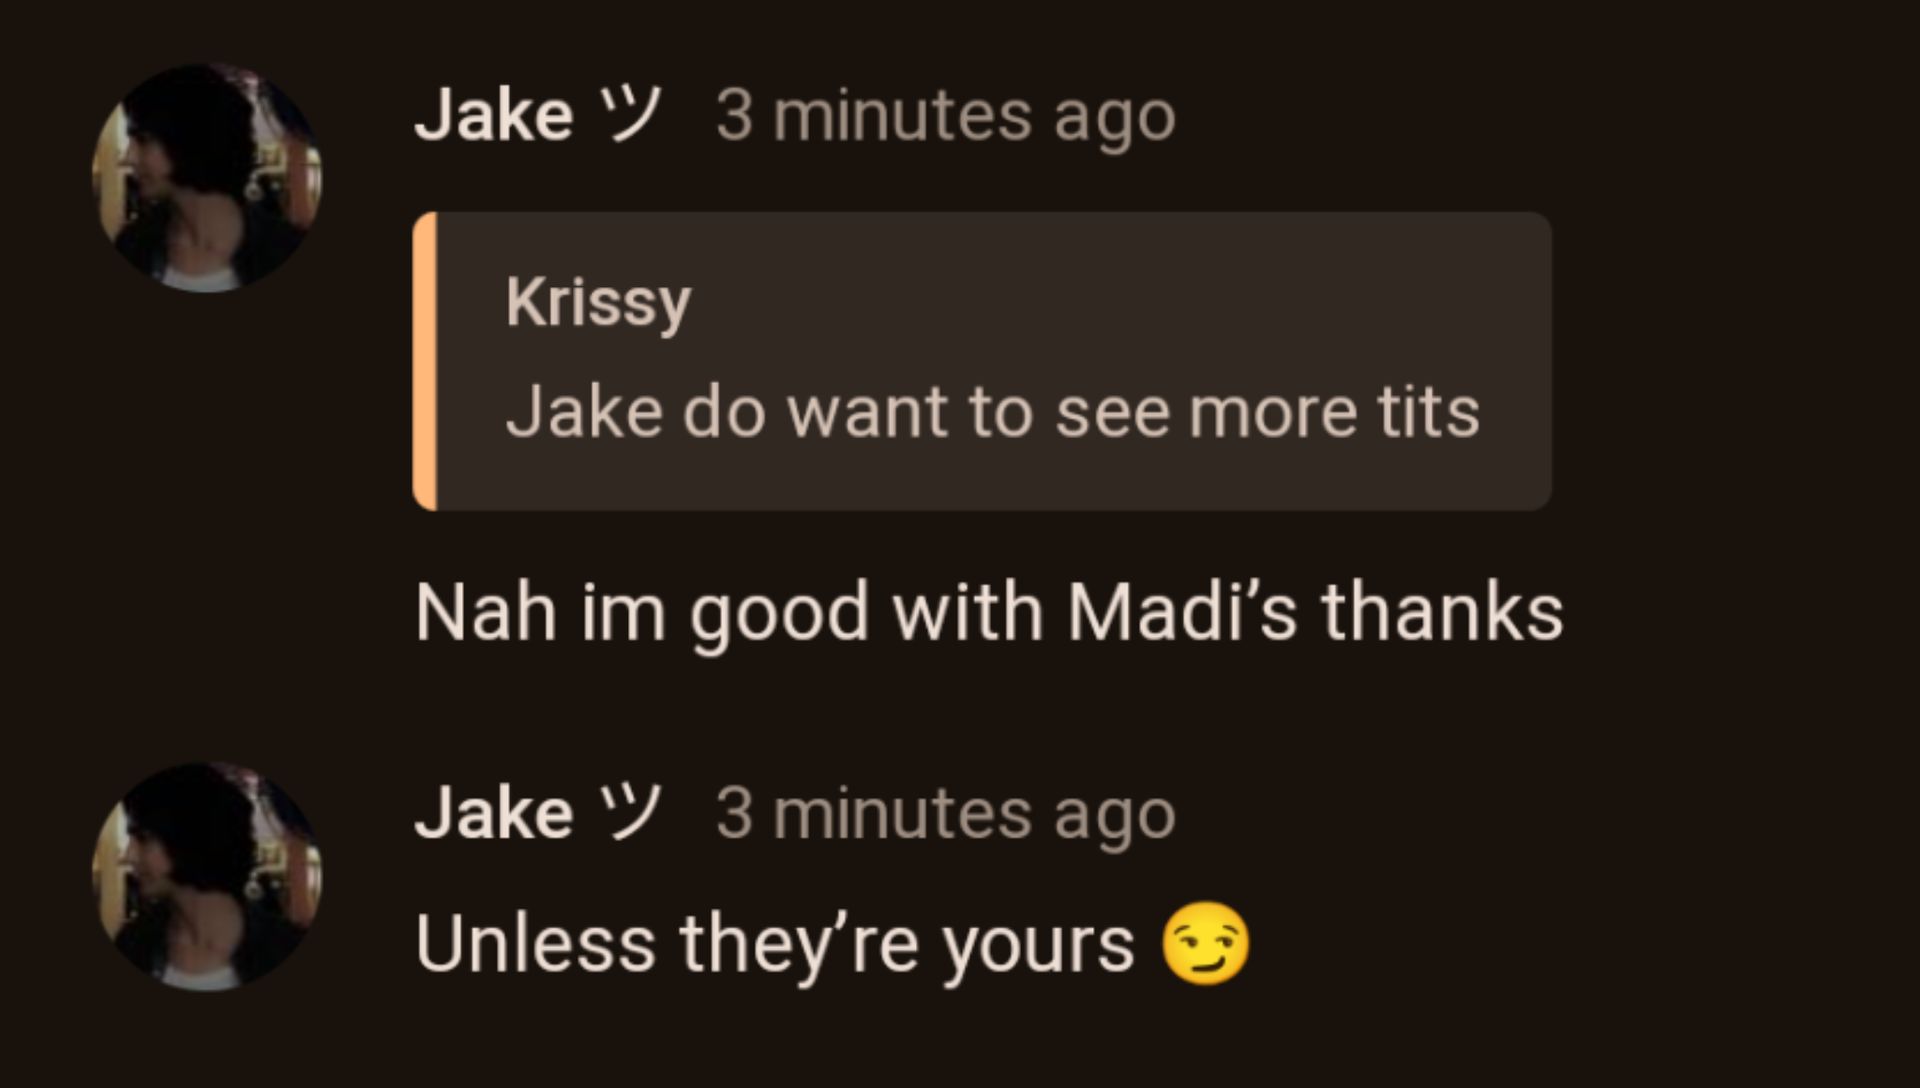 Jake W/ 3 minutes ago
Krissy
Jake do want to see more tits
Nah im good with Madi's thanks
Jake / 3 minutes ago
Unless they're yours